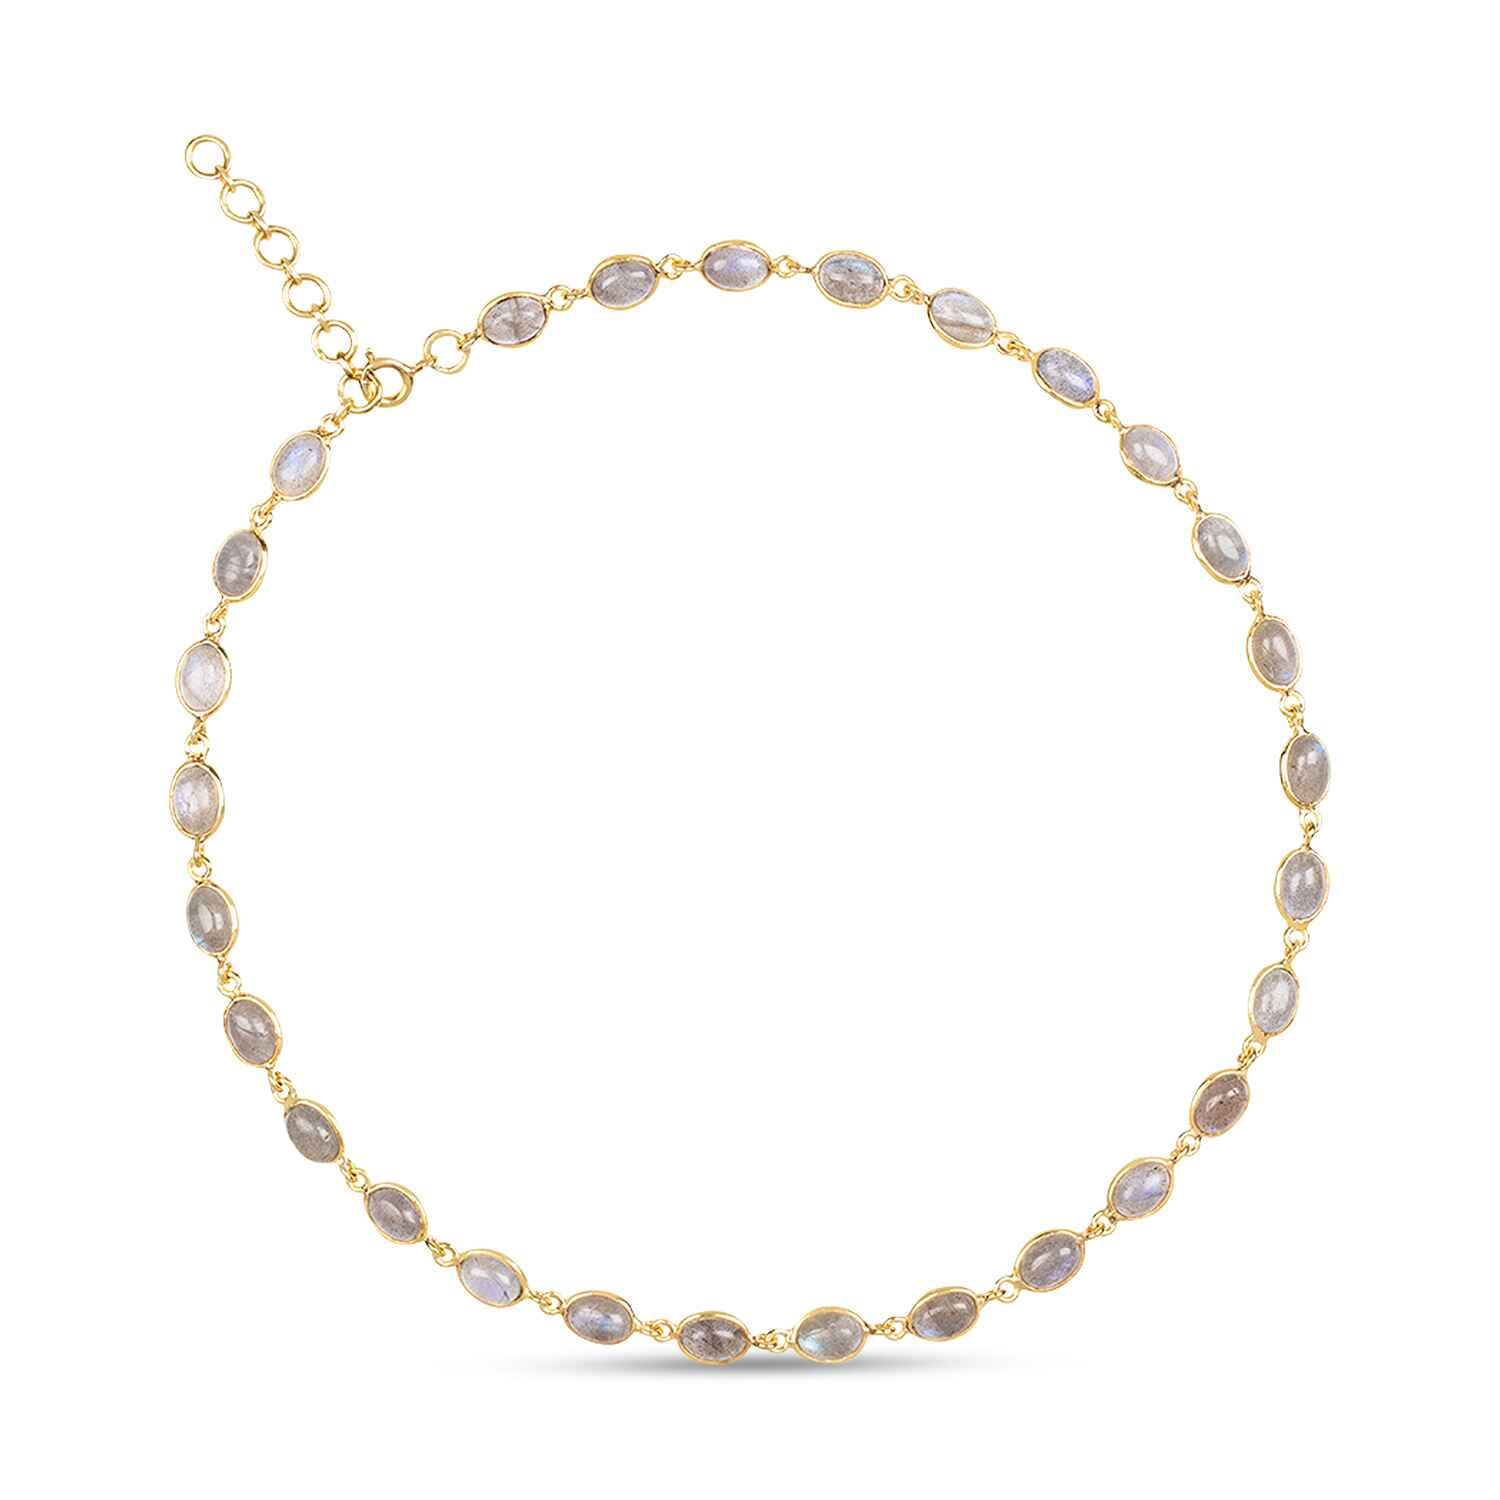 Hand crafted from smooth labradorite pre-loved gemstones, this gold necklace will add glamour to any look - whether worn alone or layered with other Amadeus favourites. The necklace may be worn as a chocker or extended to a longer version.